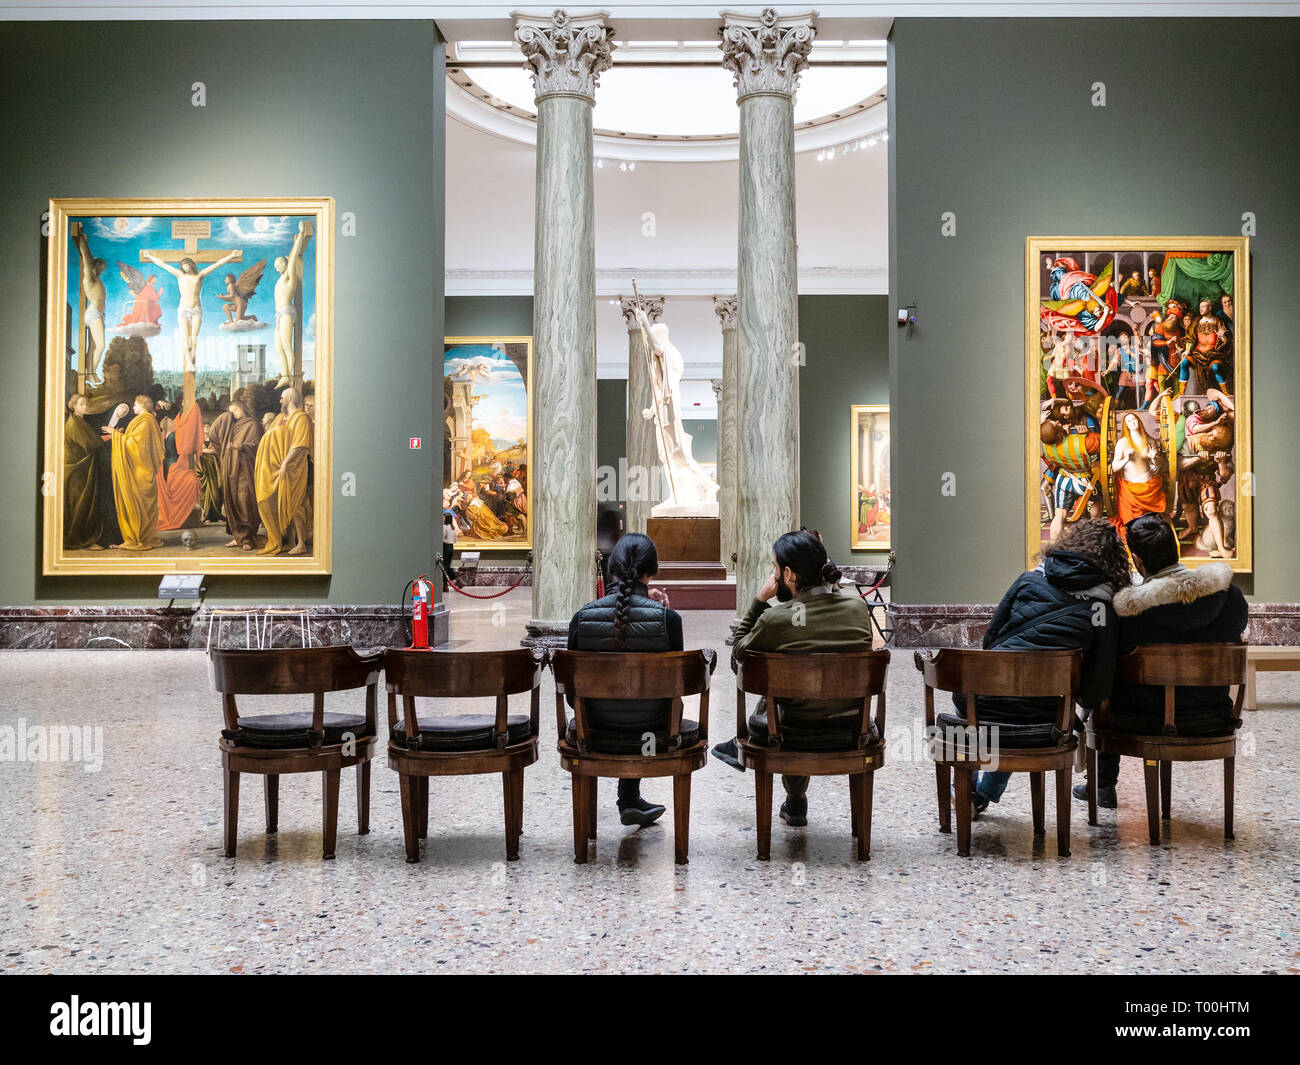 MILAN, ITALY - FEBRUARY 24, 2019: visitors sit in hall in Pinacoteca di Brera (Brera Art Gallery) in Milan. The Brera is national picture gallery of a Stock Photo